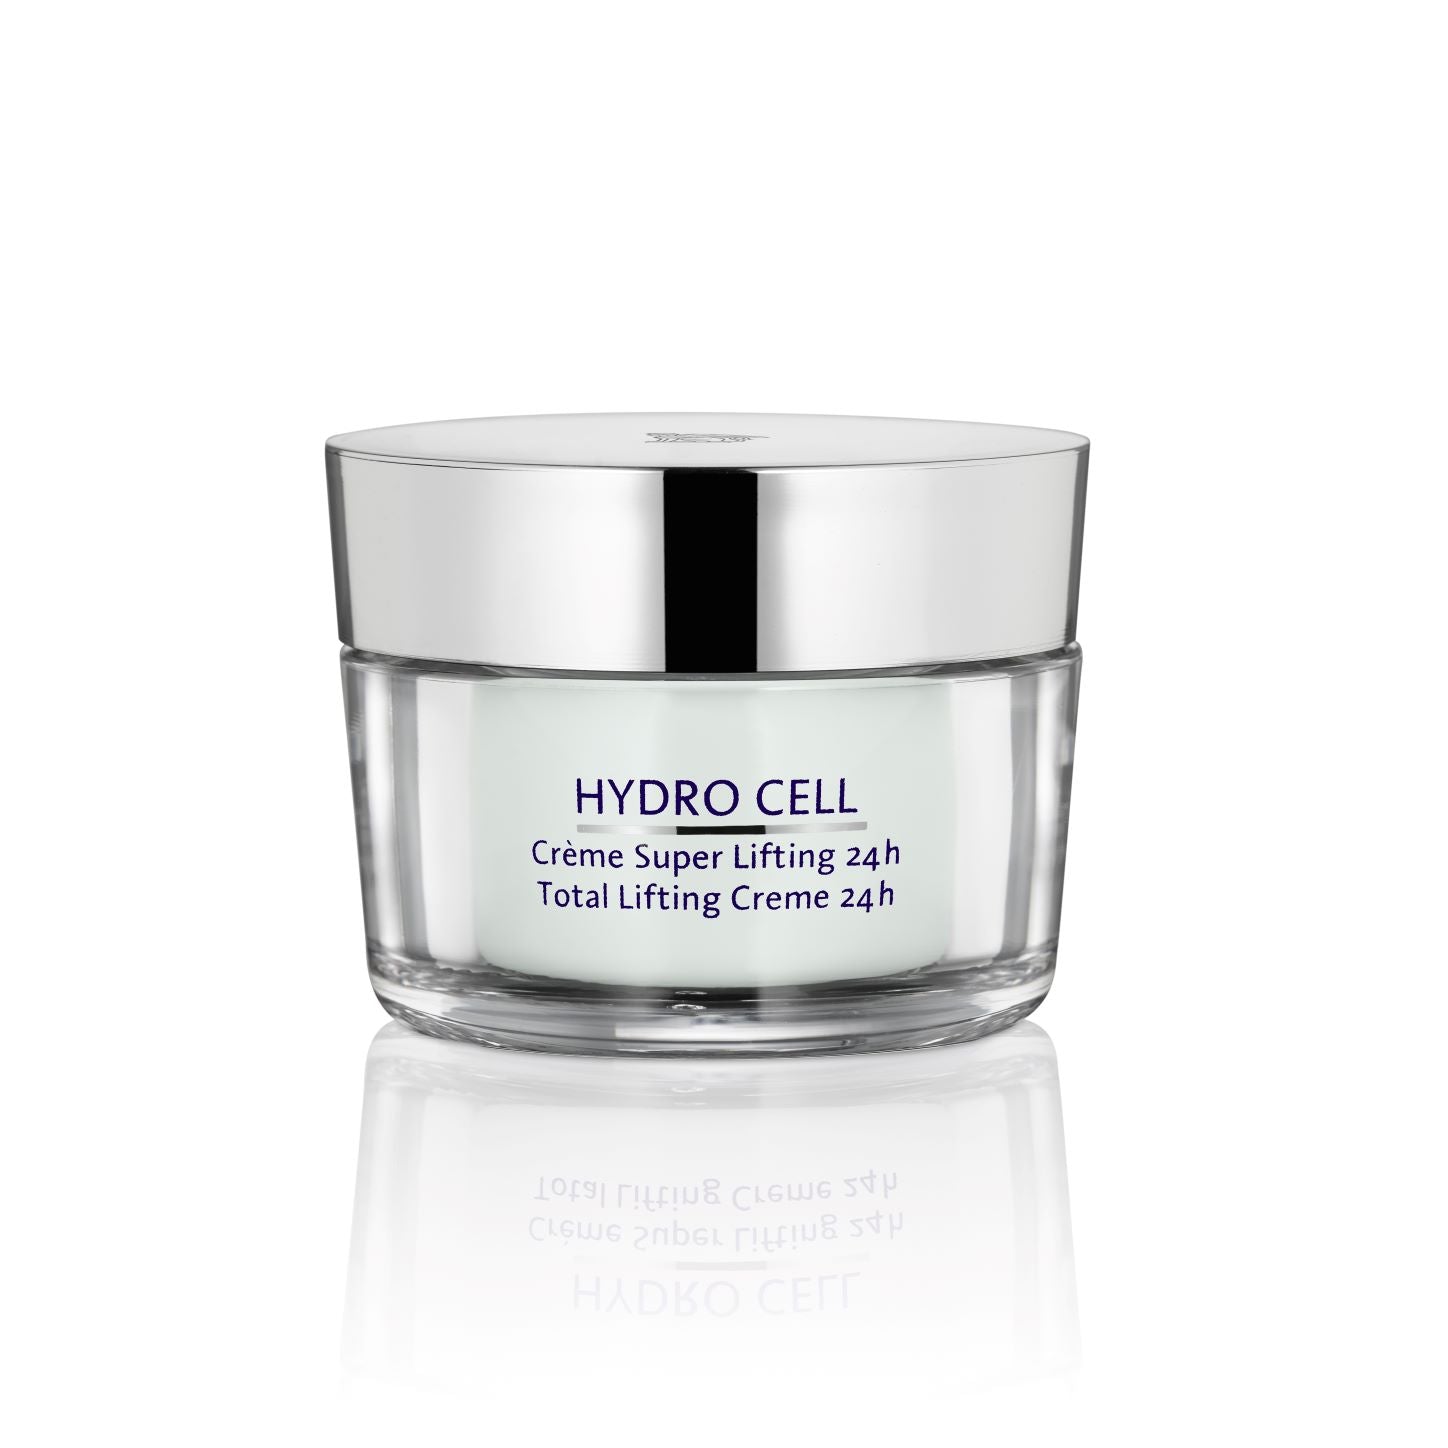 Hydro Cell Total Lifting Cream 24h 50ml*